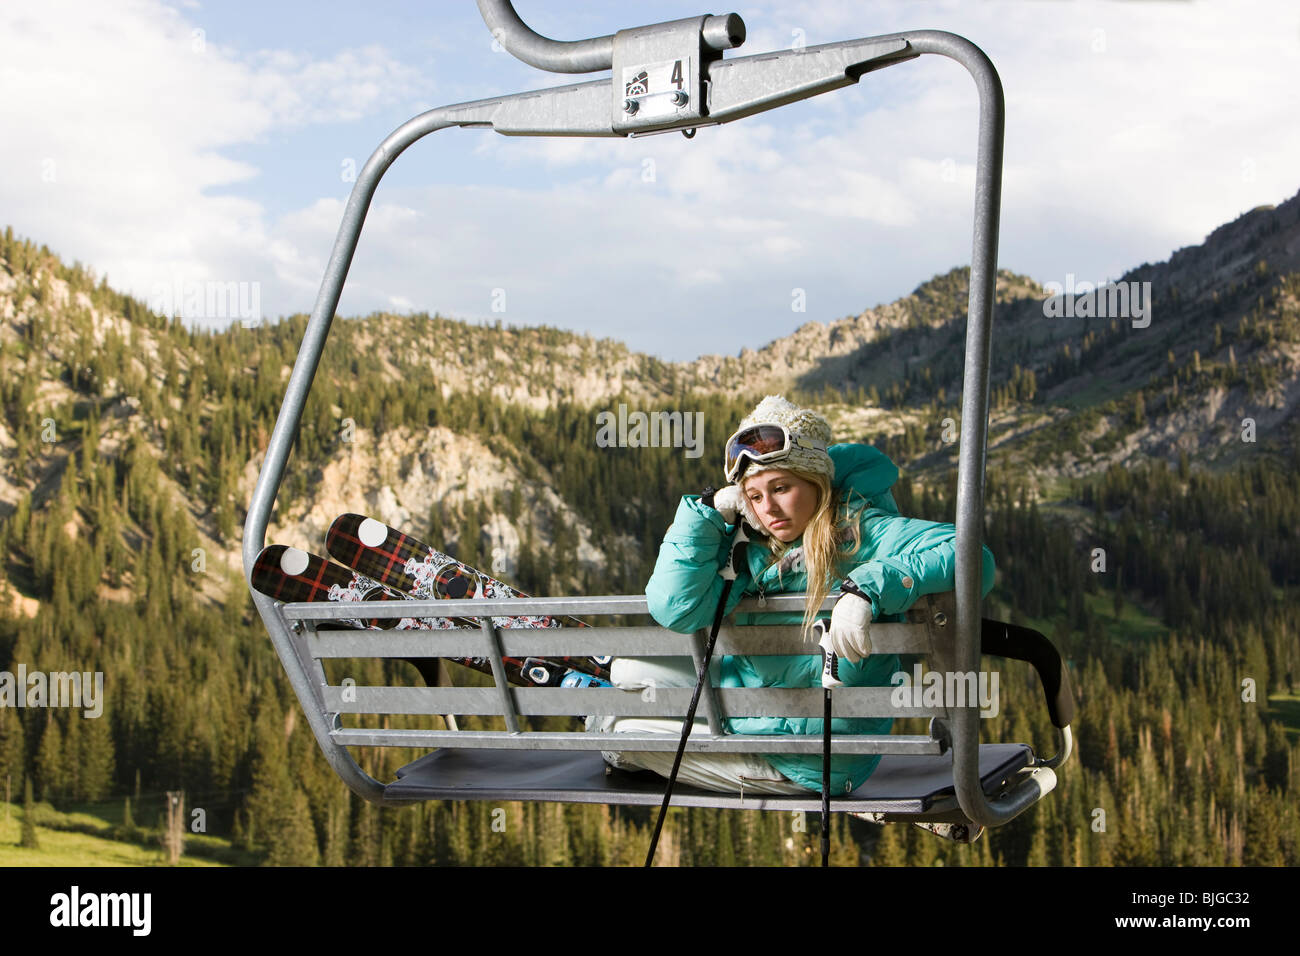 skier on a ski lift during the summer Stock Photo